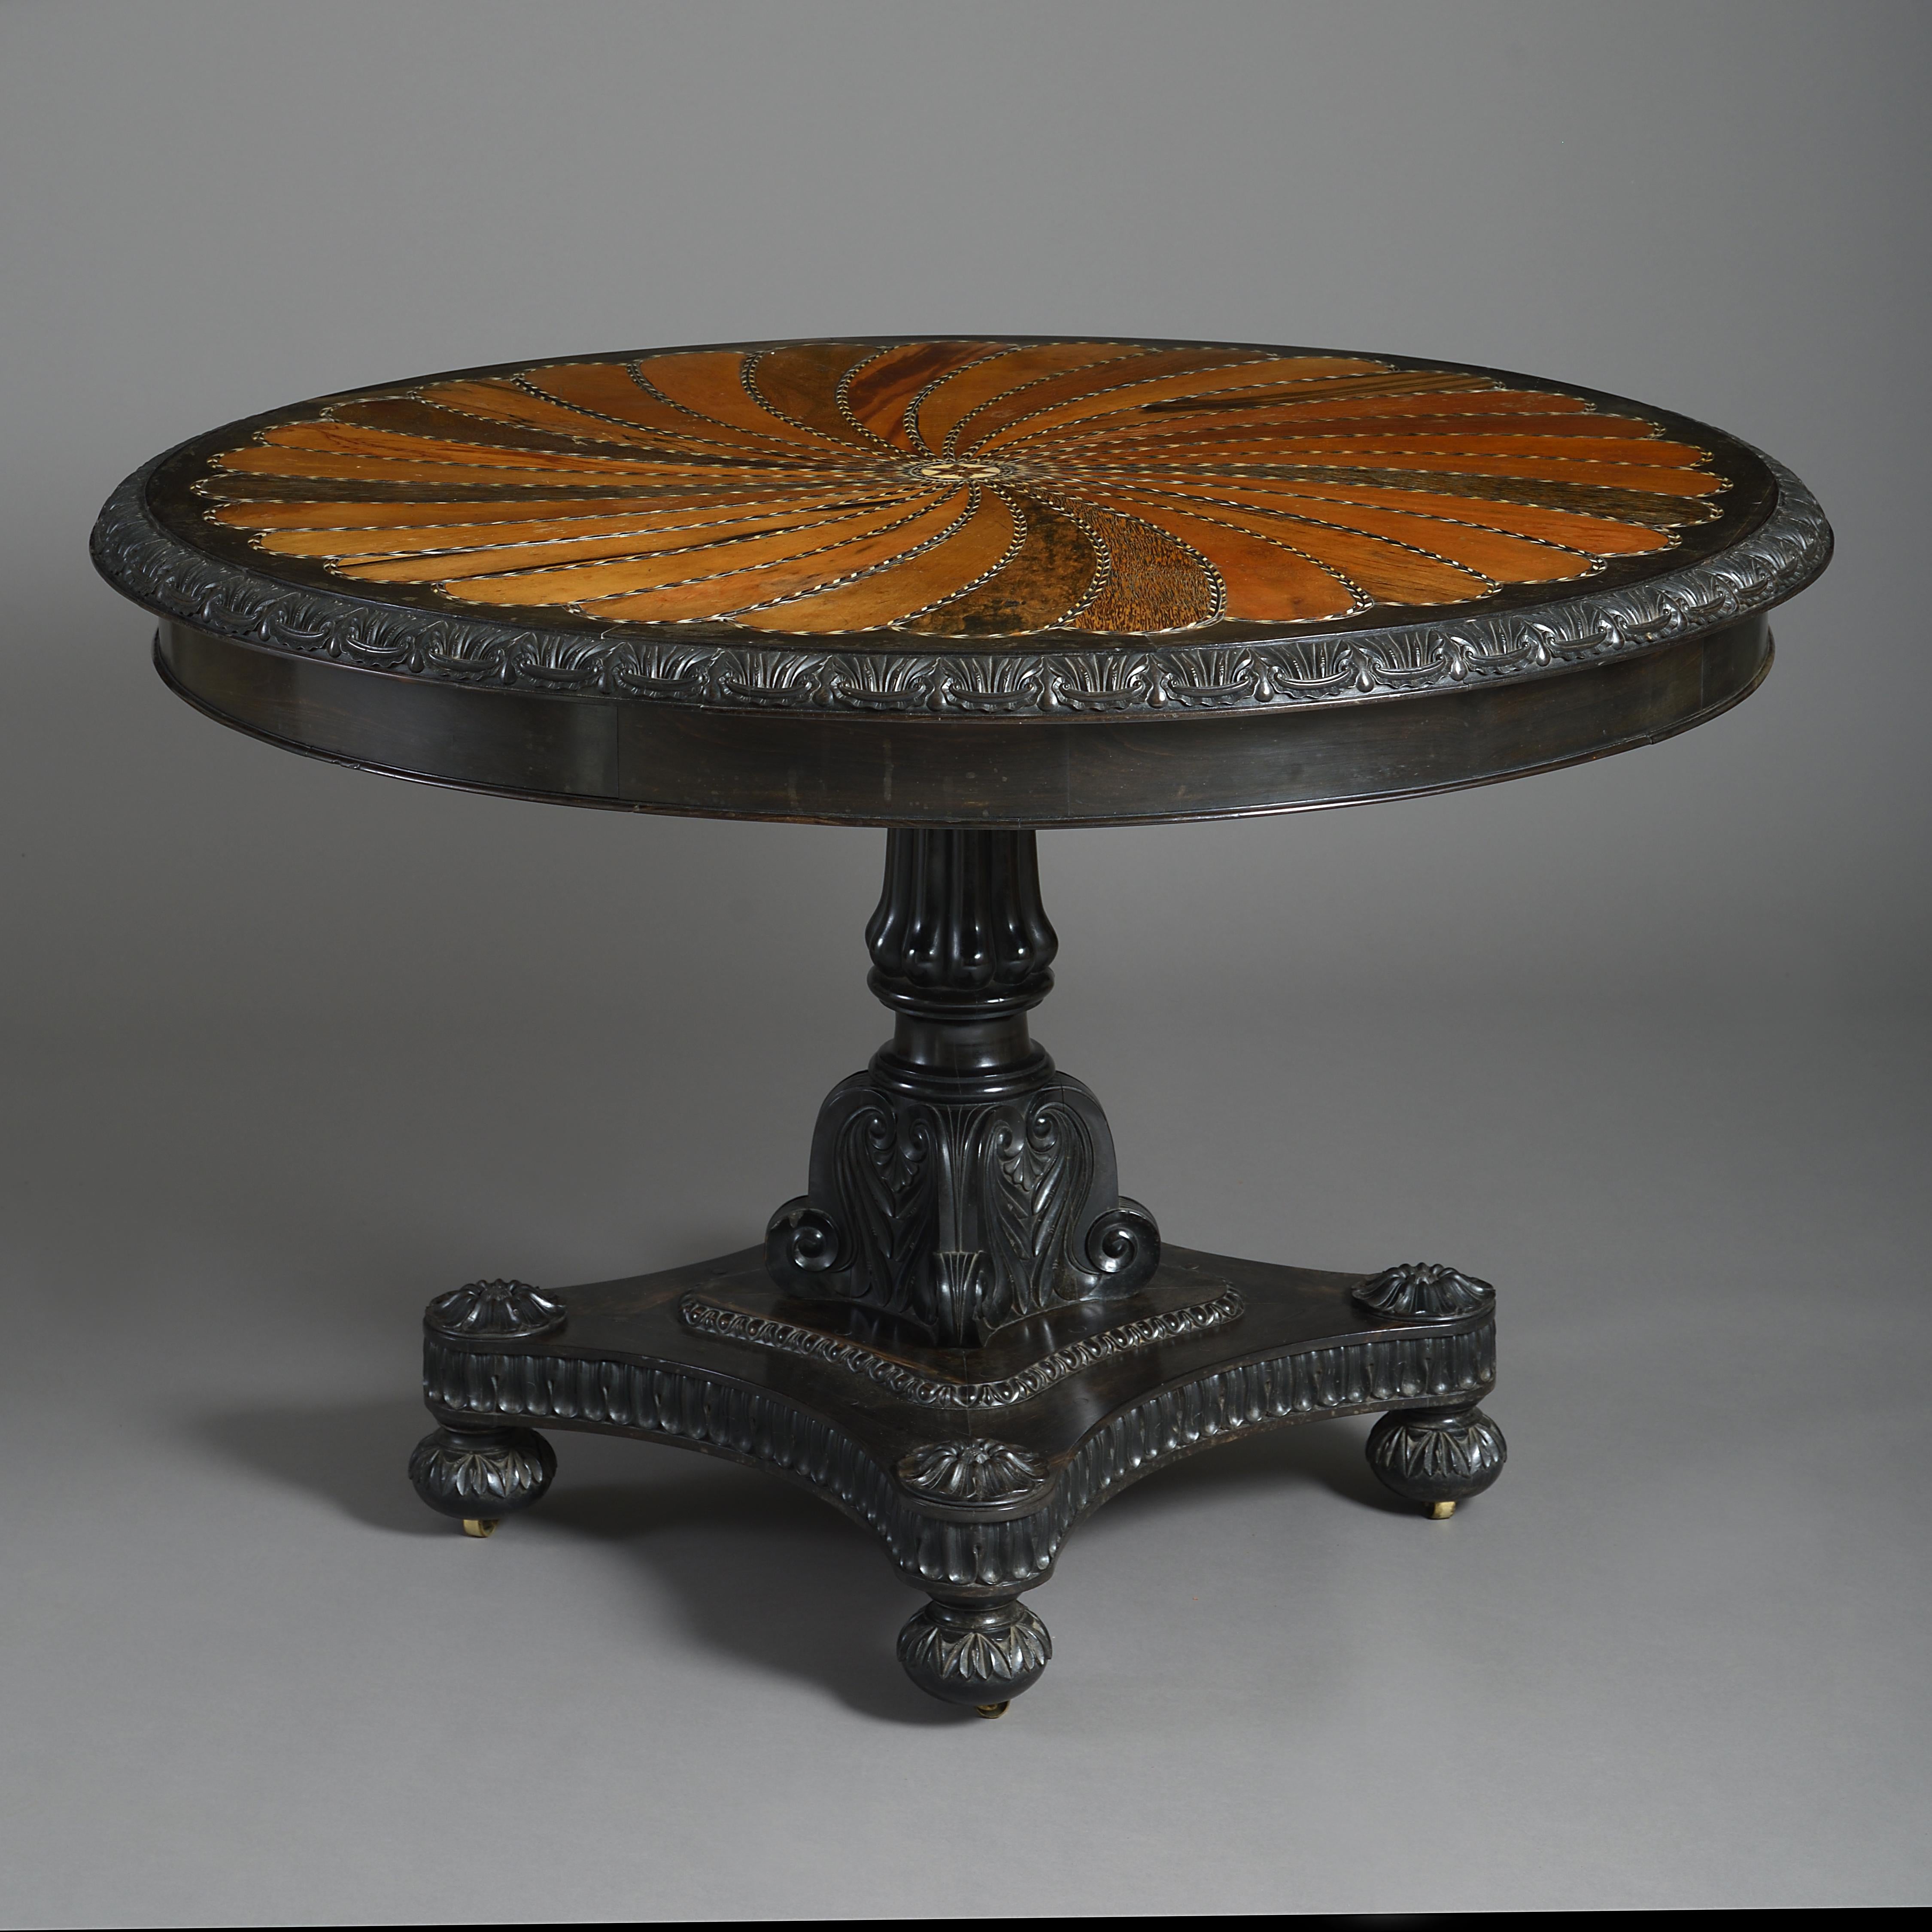 A fine Anglo-Indian ebony and specimen wood centre table, Ceylon, circa 1850.

The circular top with panels of palm wood, satinwood, Macassar ebony, calamander, and other woods within ivory and ebony fillets.